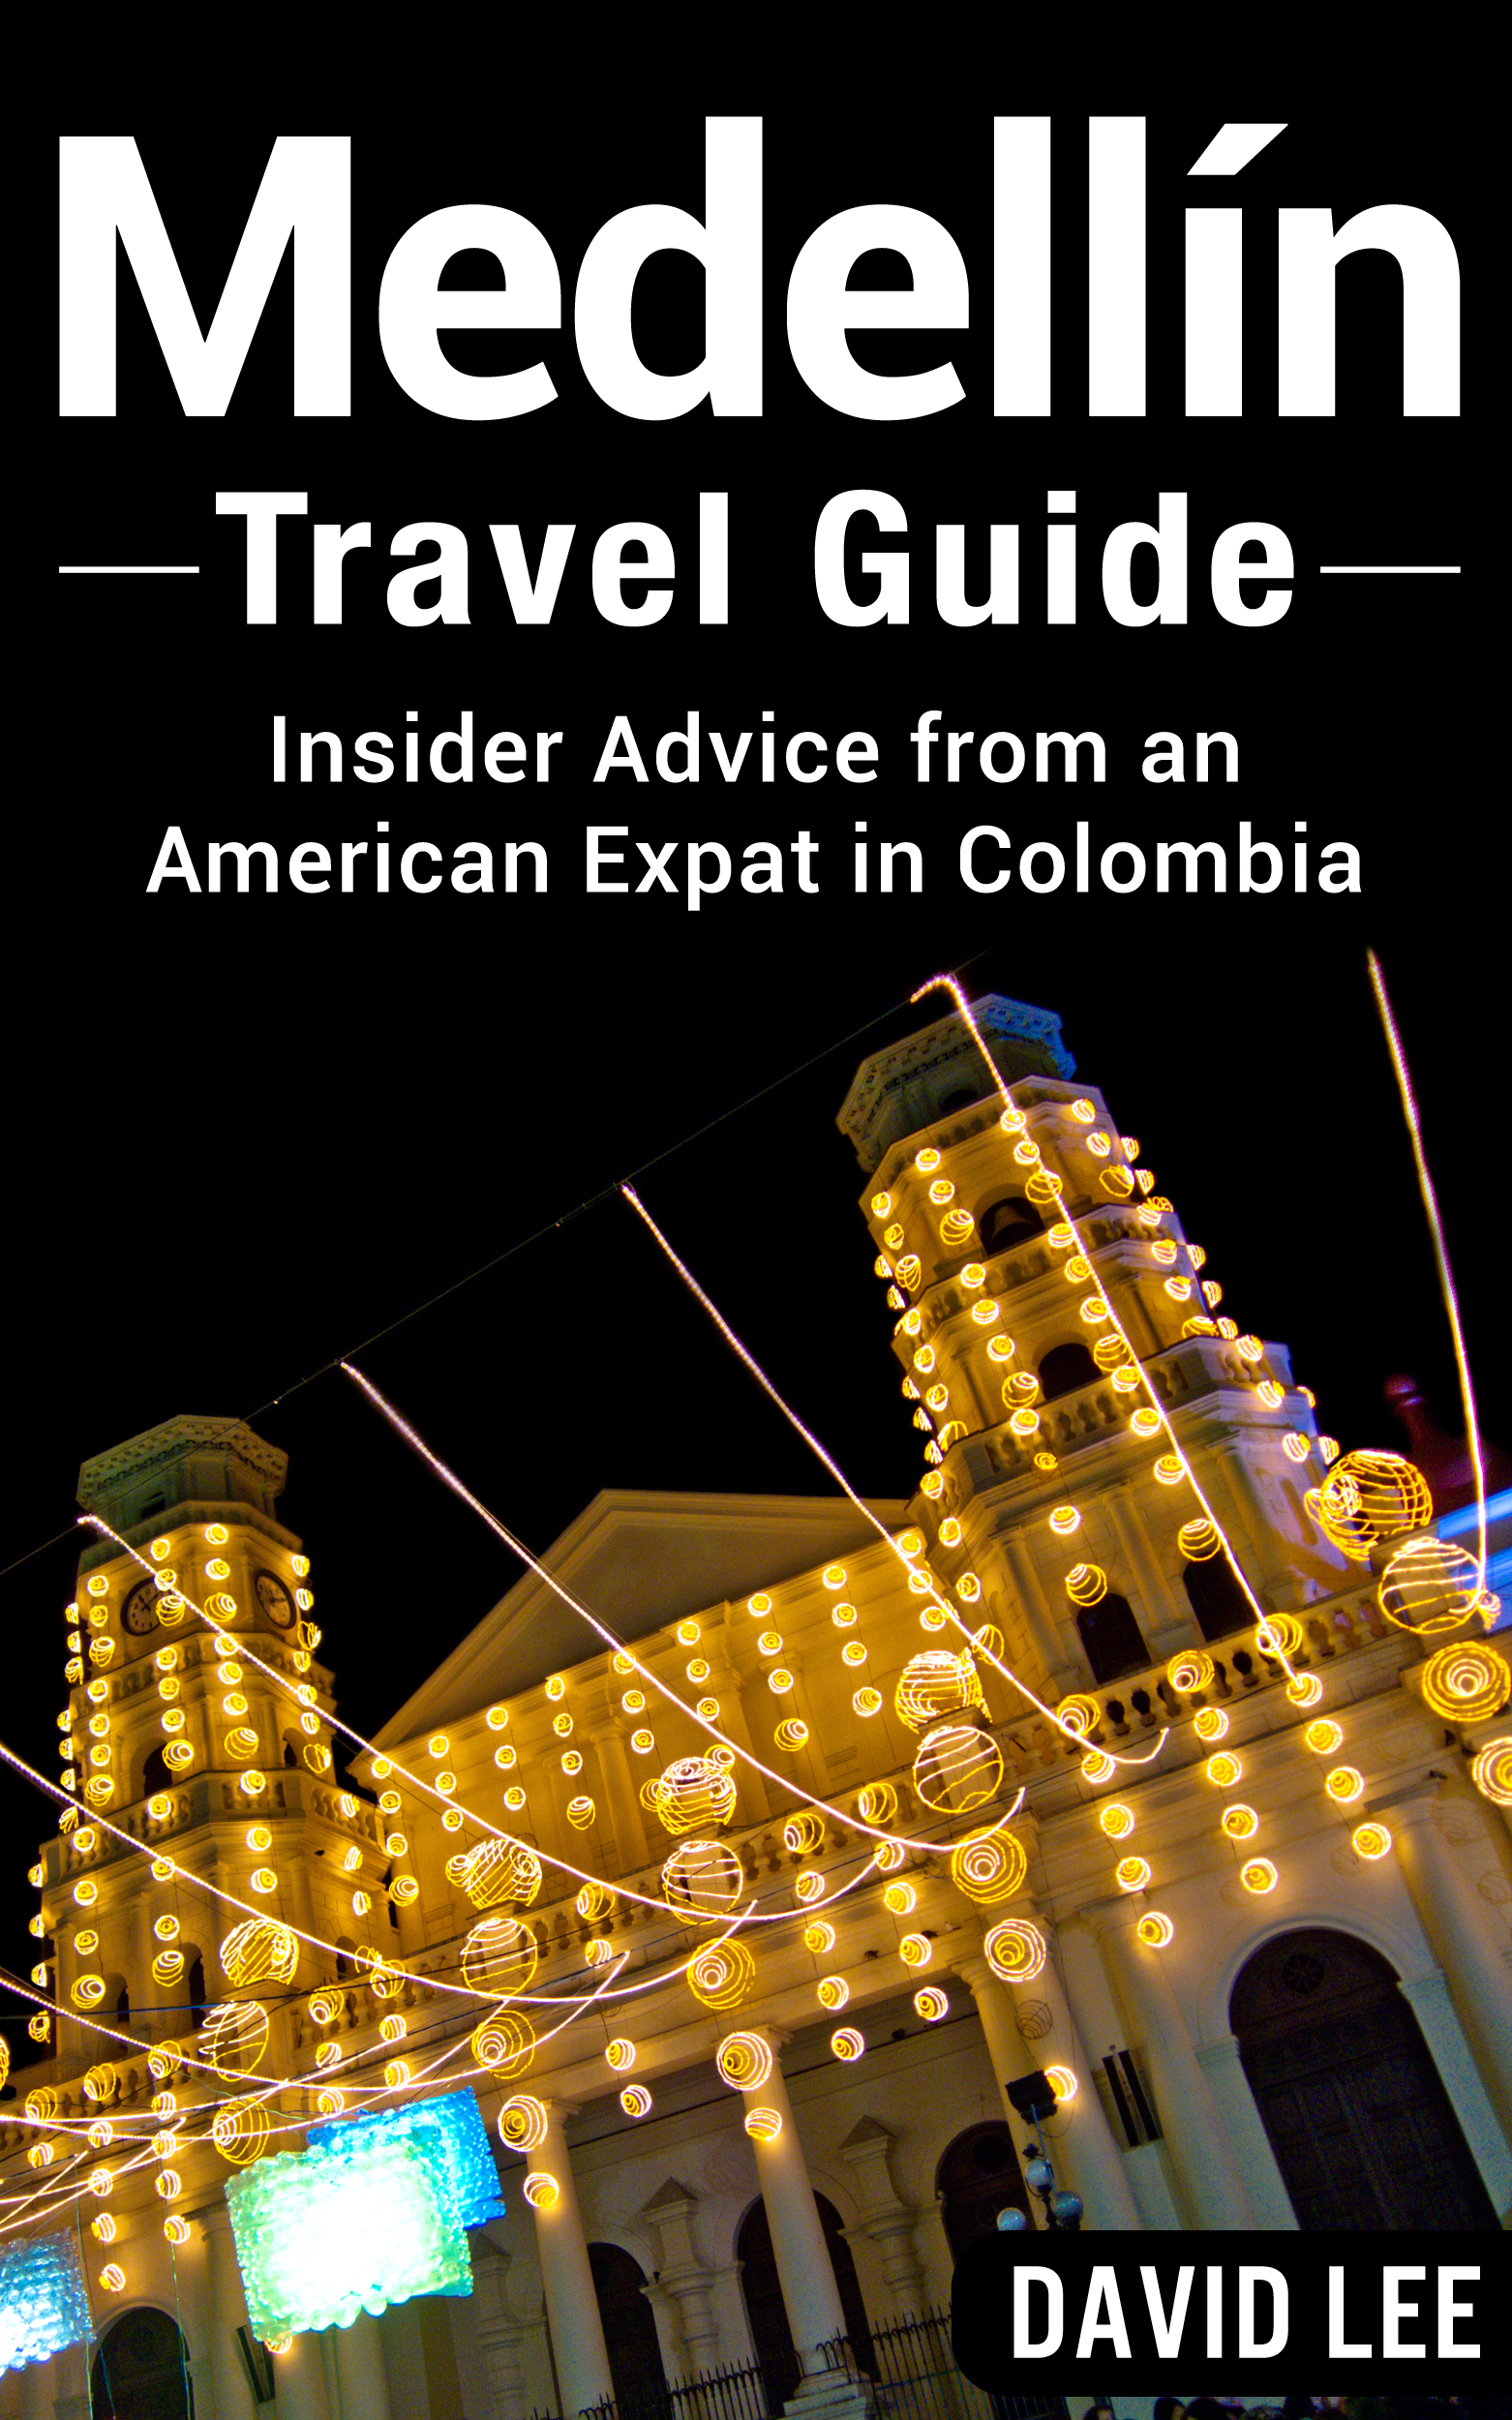 Medellin Travel Guide: Insider Advice from an American Expat in Colombia